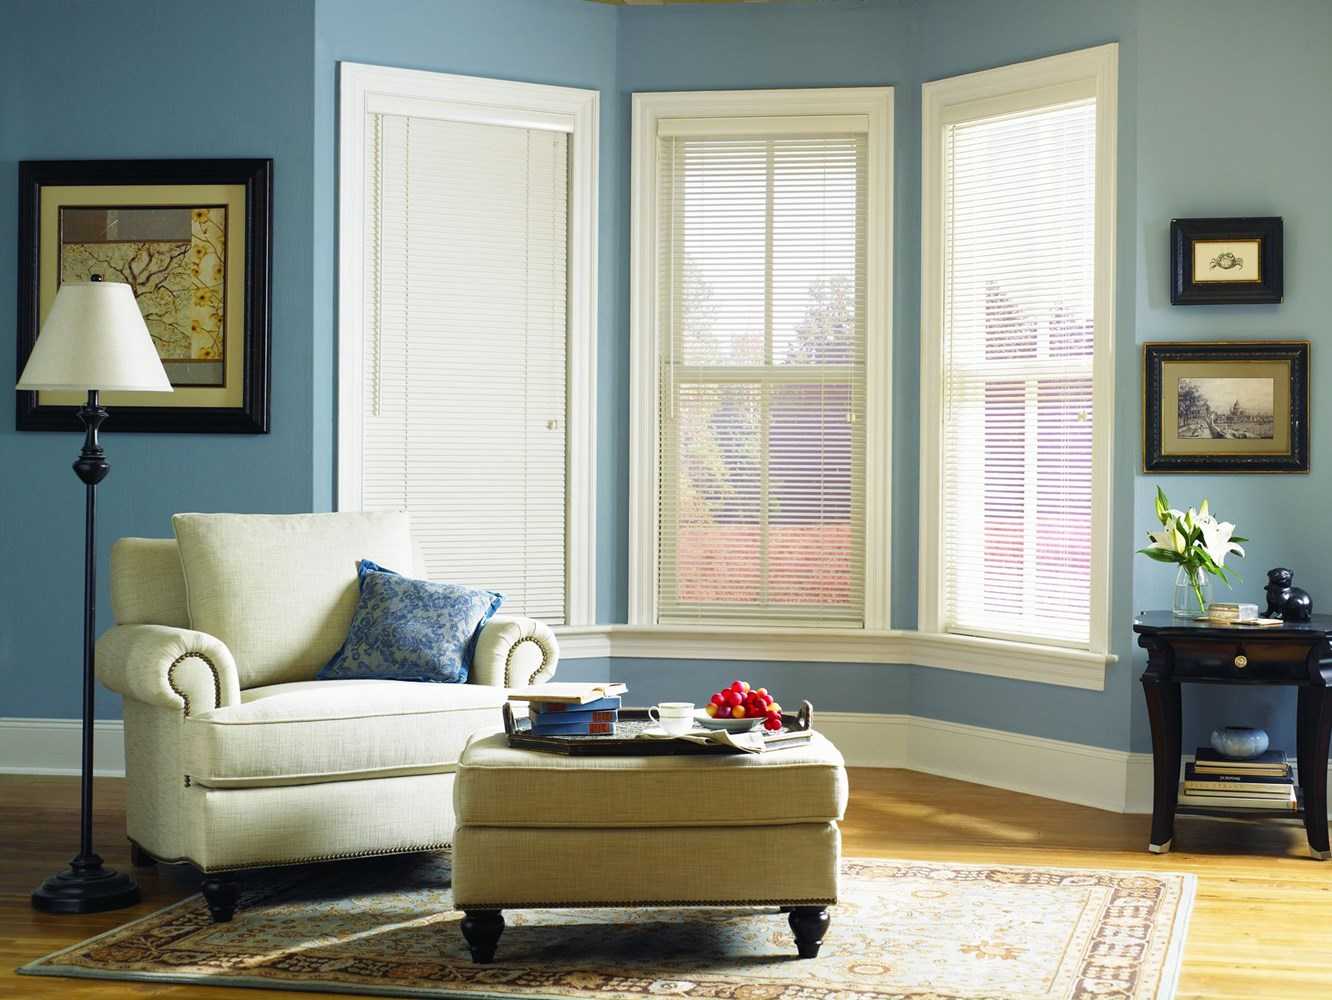 Top Picks: Best Blinds for Windows in Modern Homes – Factory Direct Blinds